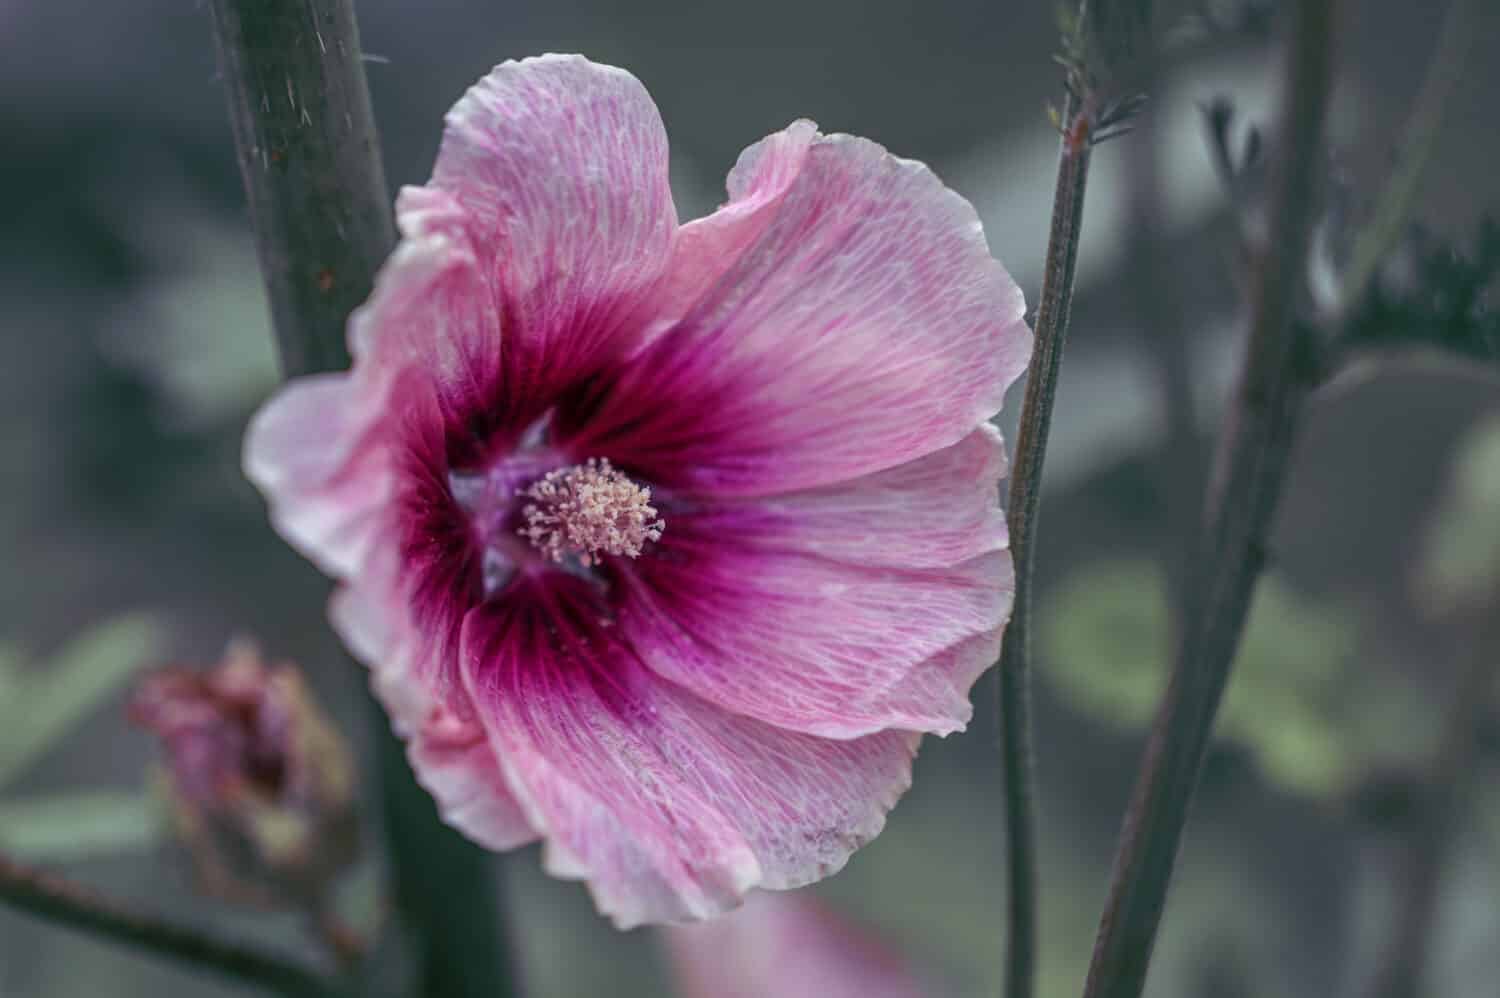 Halo Apricot Hollyhock, in full bloom. The flower is pink and purple